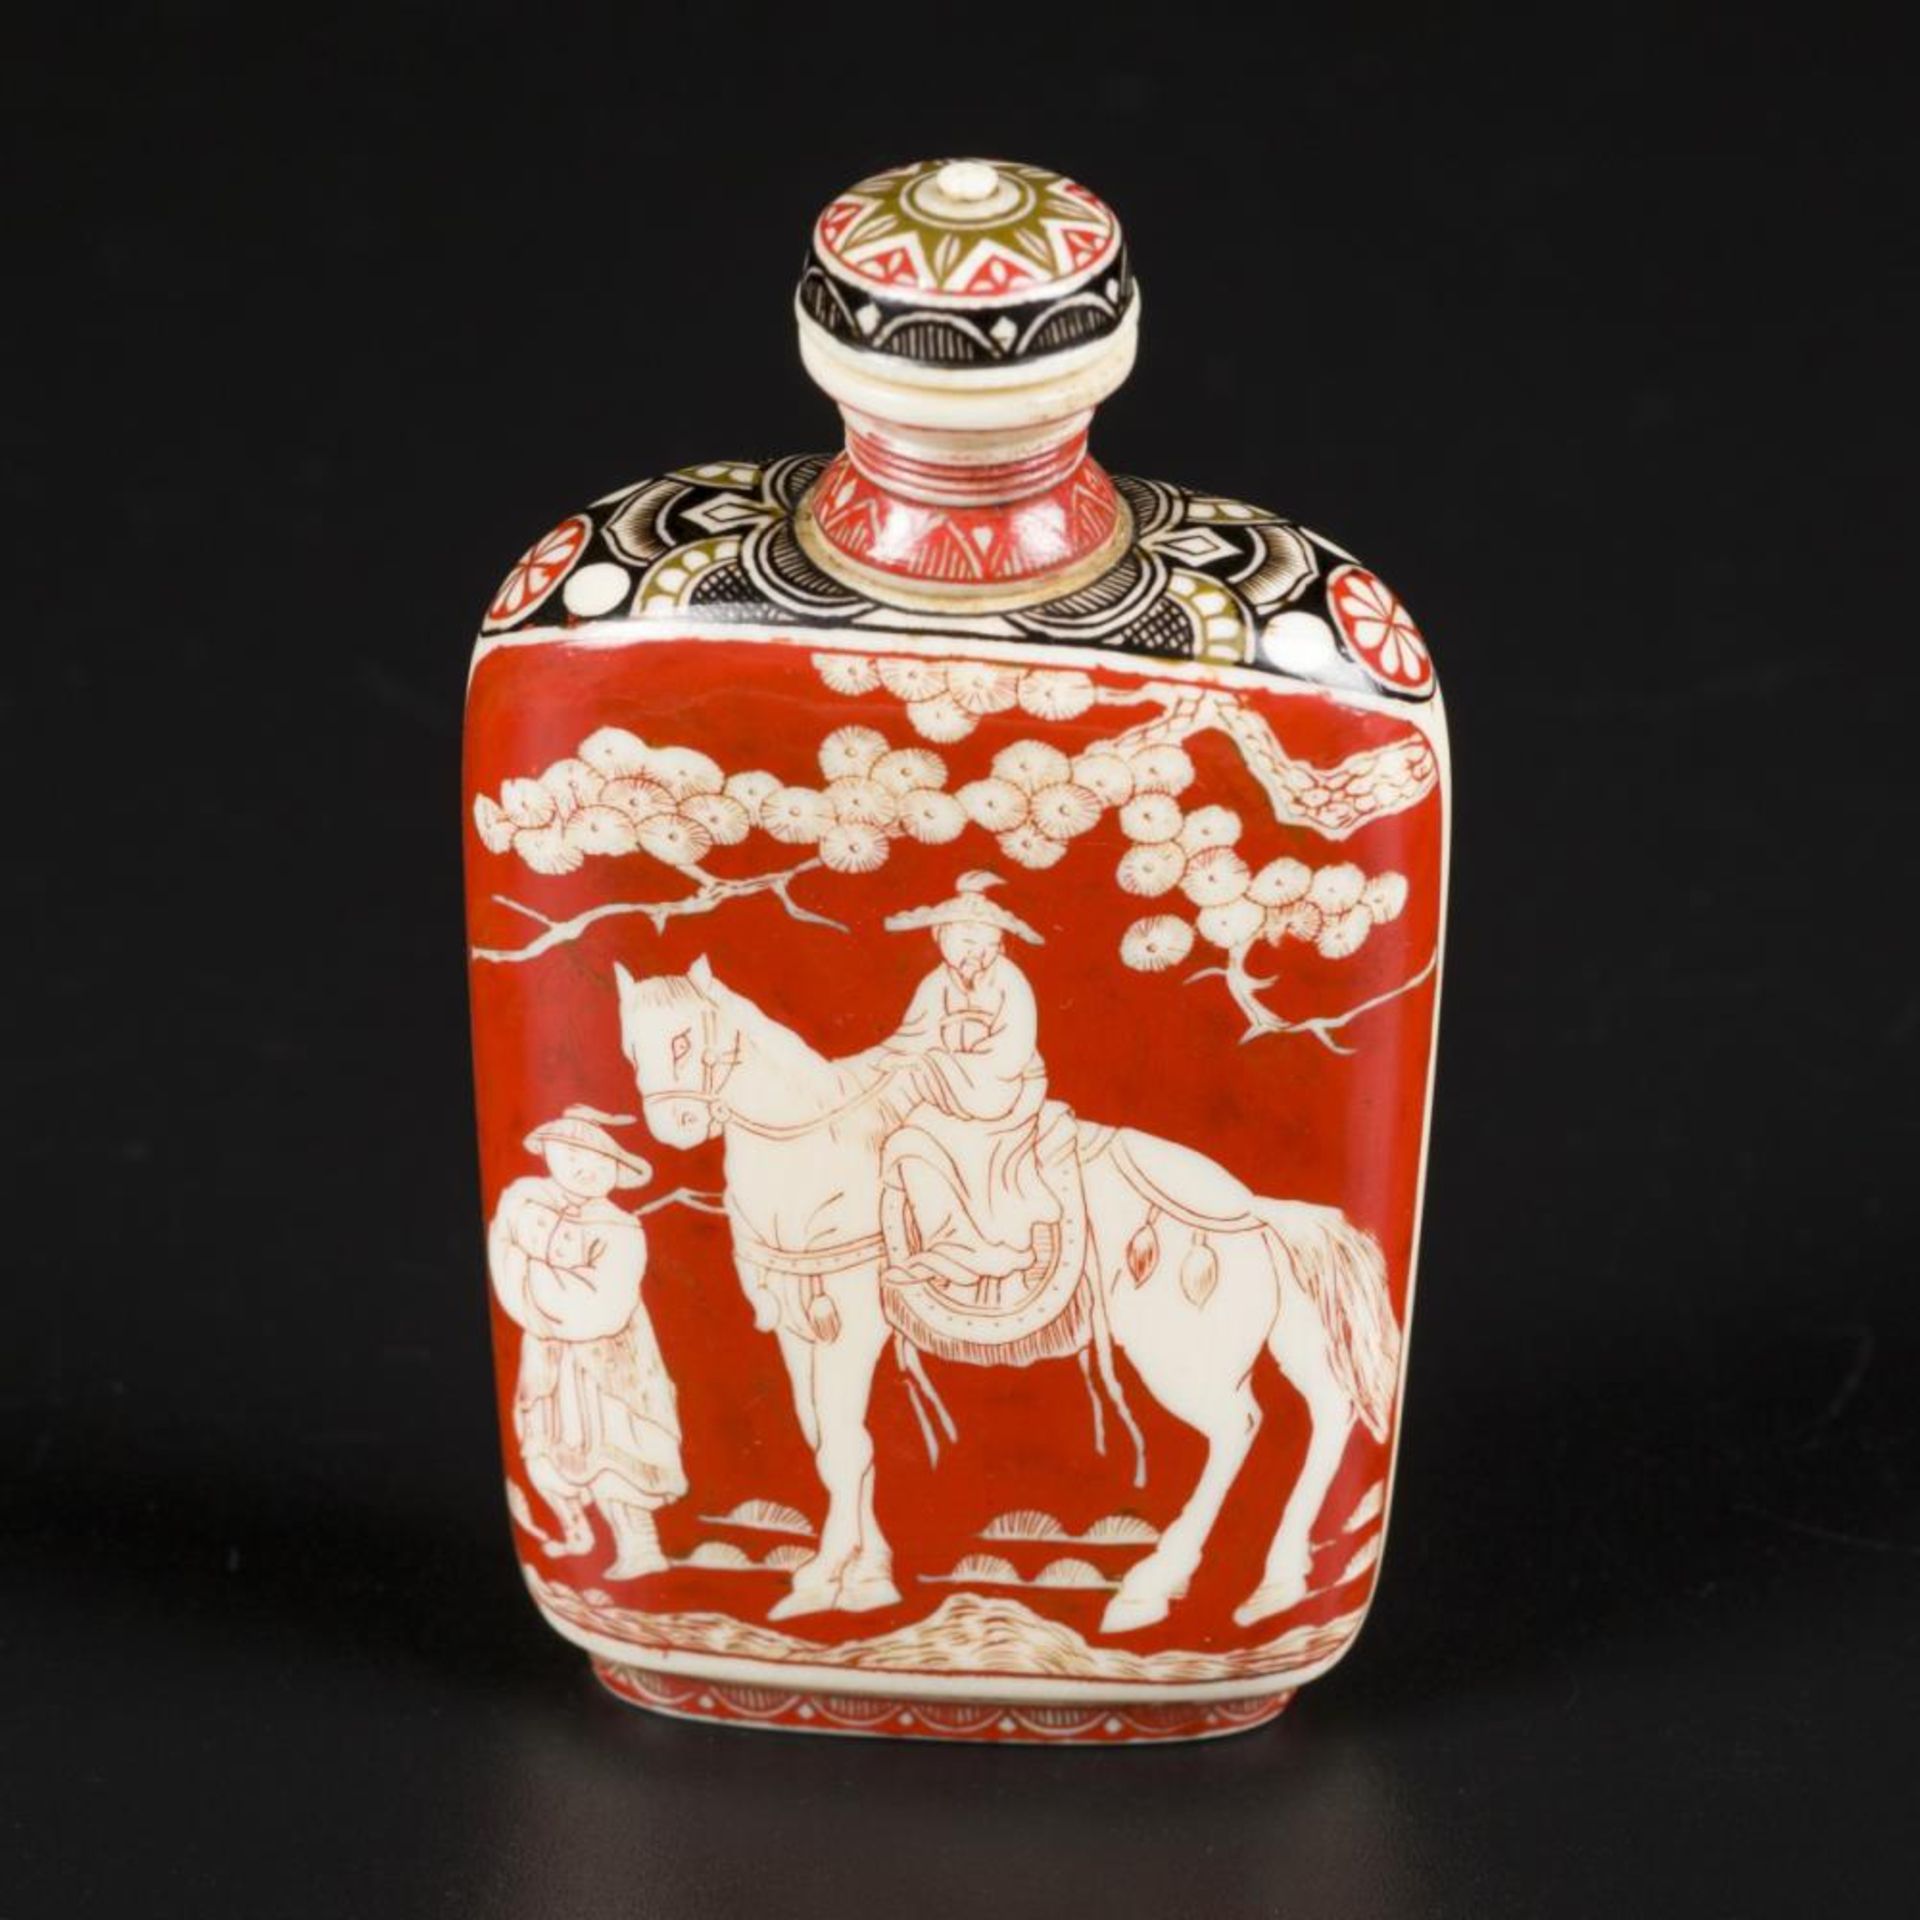 An ivory snuff bottle decorated with various figures under a blossom tree. China, late 19th century. - Image 2 of 5